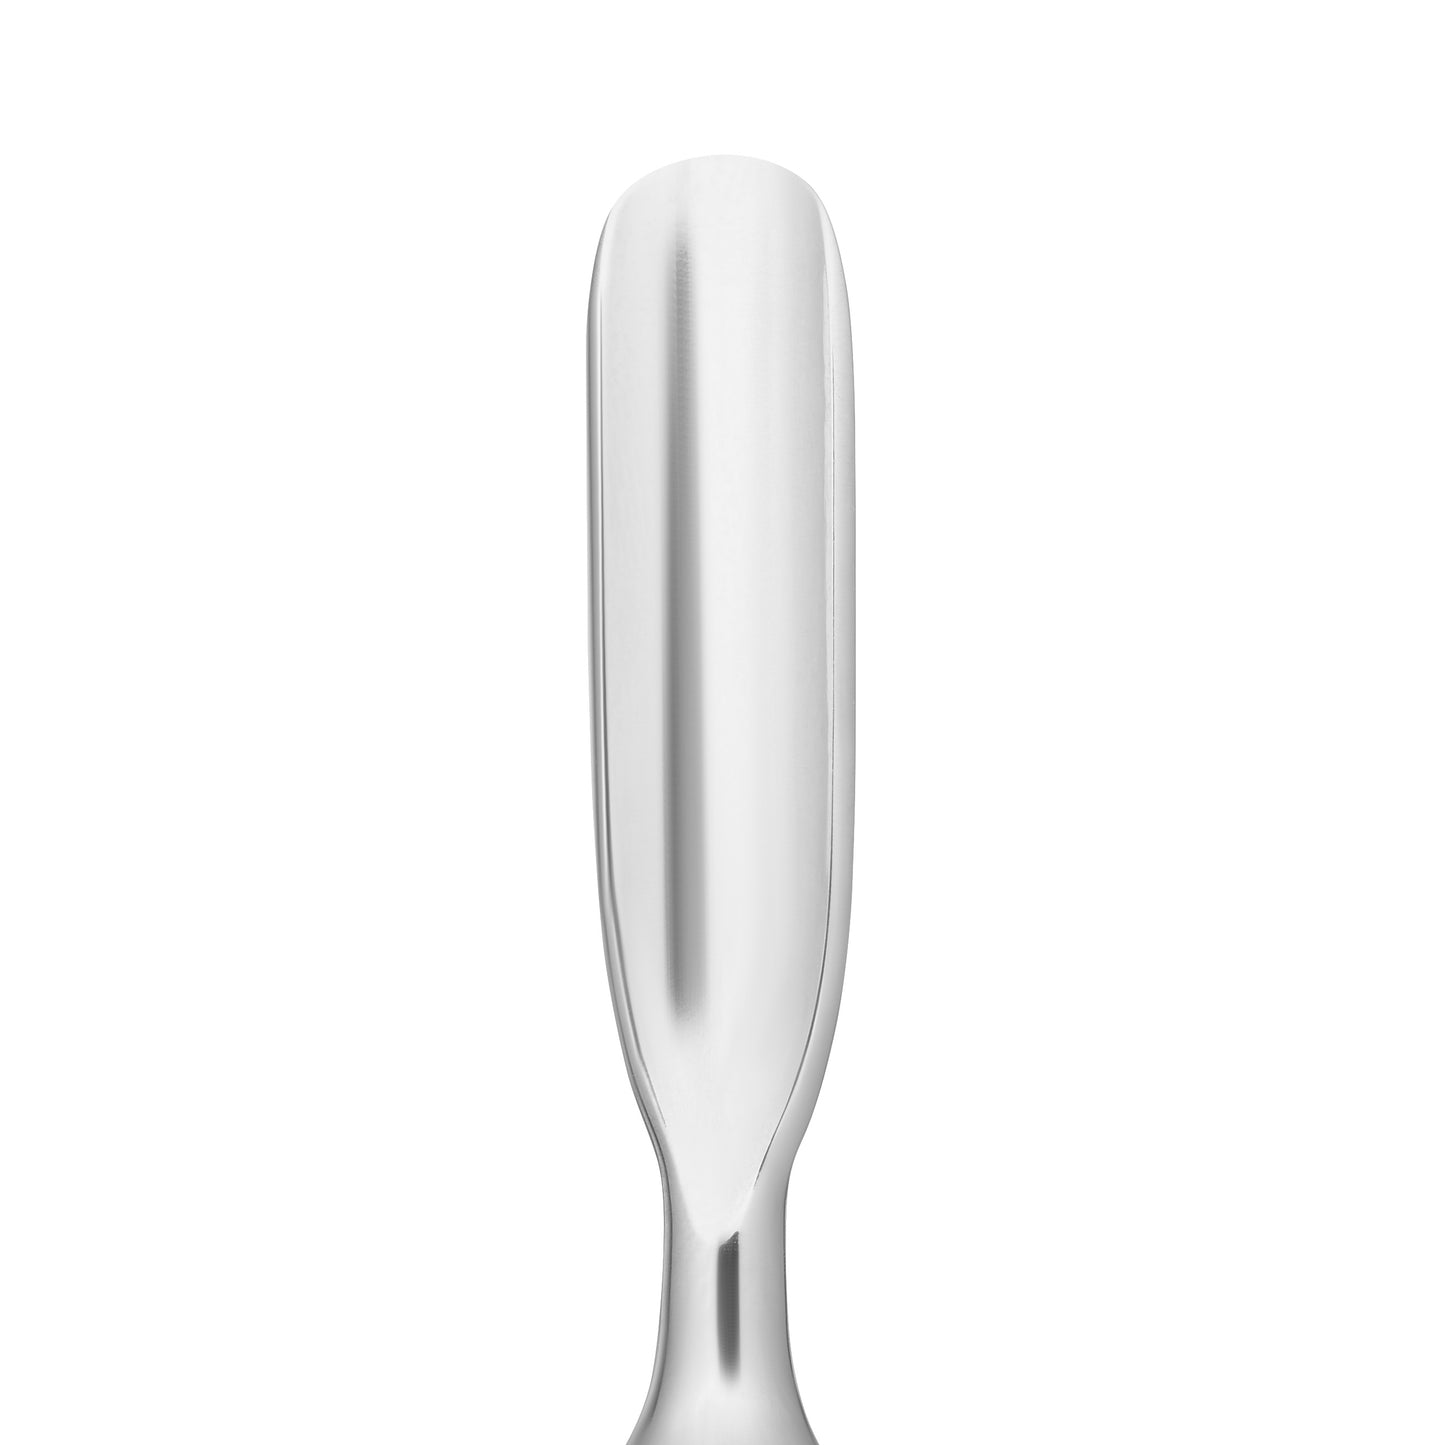 STALEKS PRO EXPERT PE 30/3 CUTICLE PUSHER (Rounded Pusher and Remover)